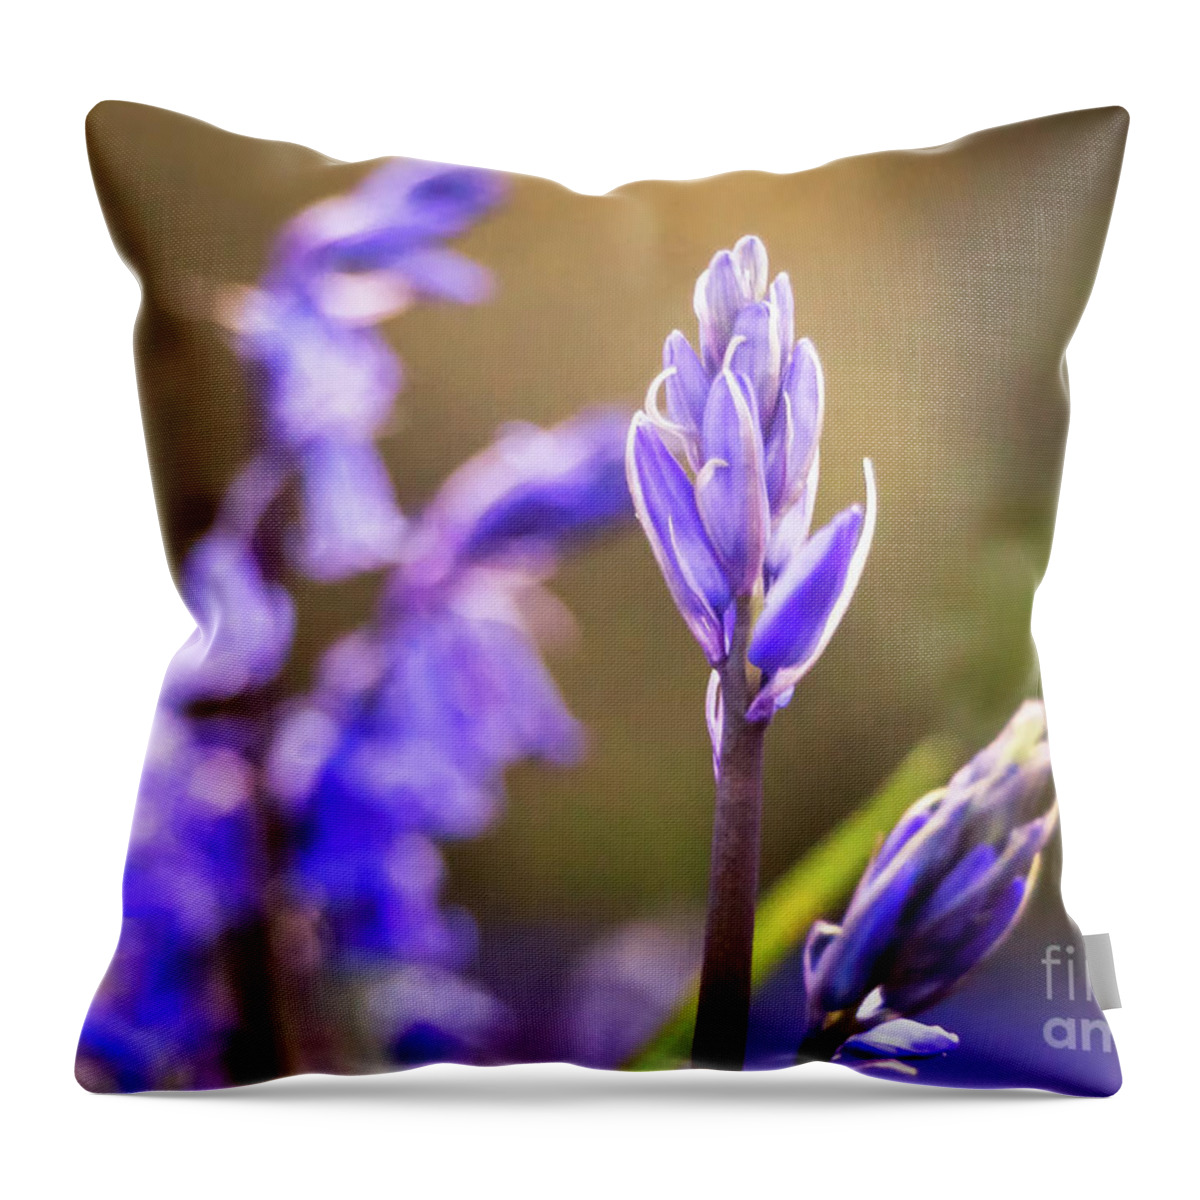 Mtphotography Throw Pillow featuring the photograph Bluebells by Mariusz Talarek